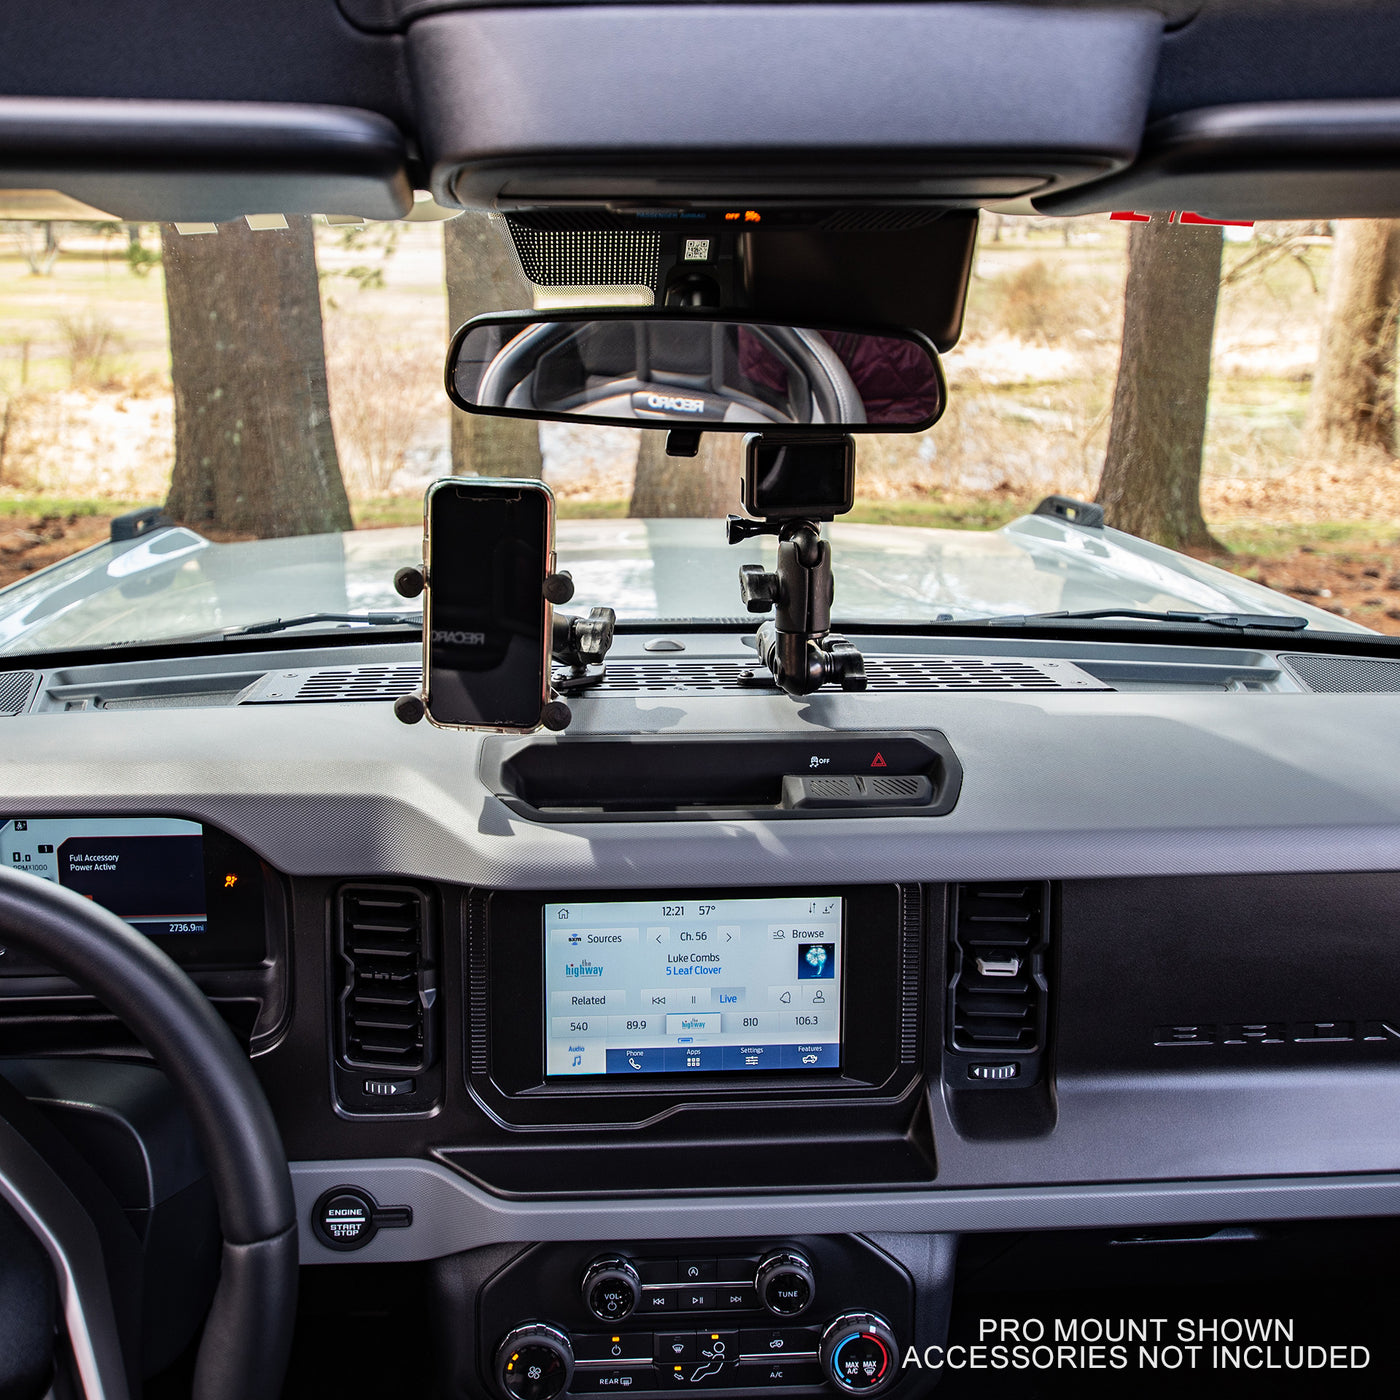 Dash Mount (Standard and PRO) | Ford Bronco (2021+)